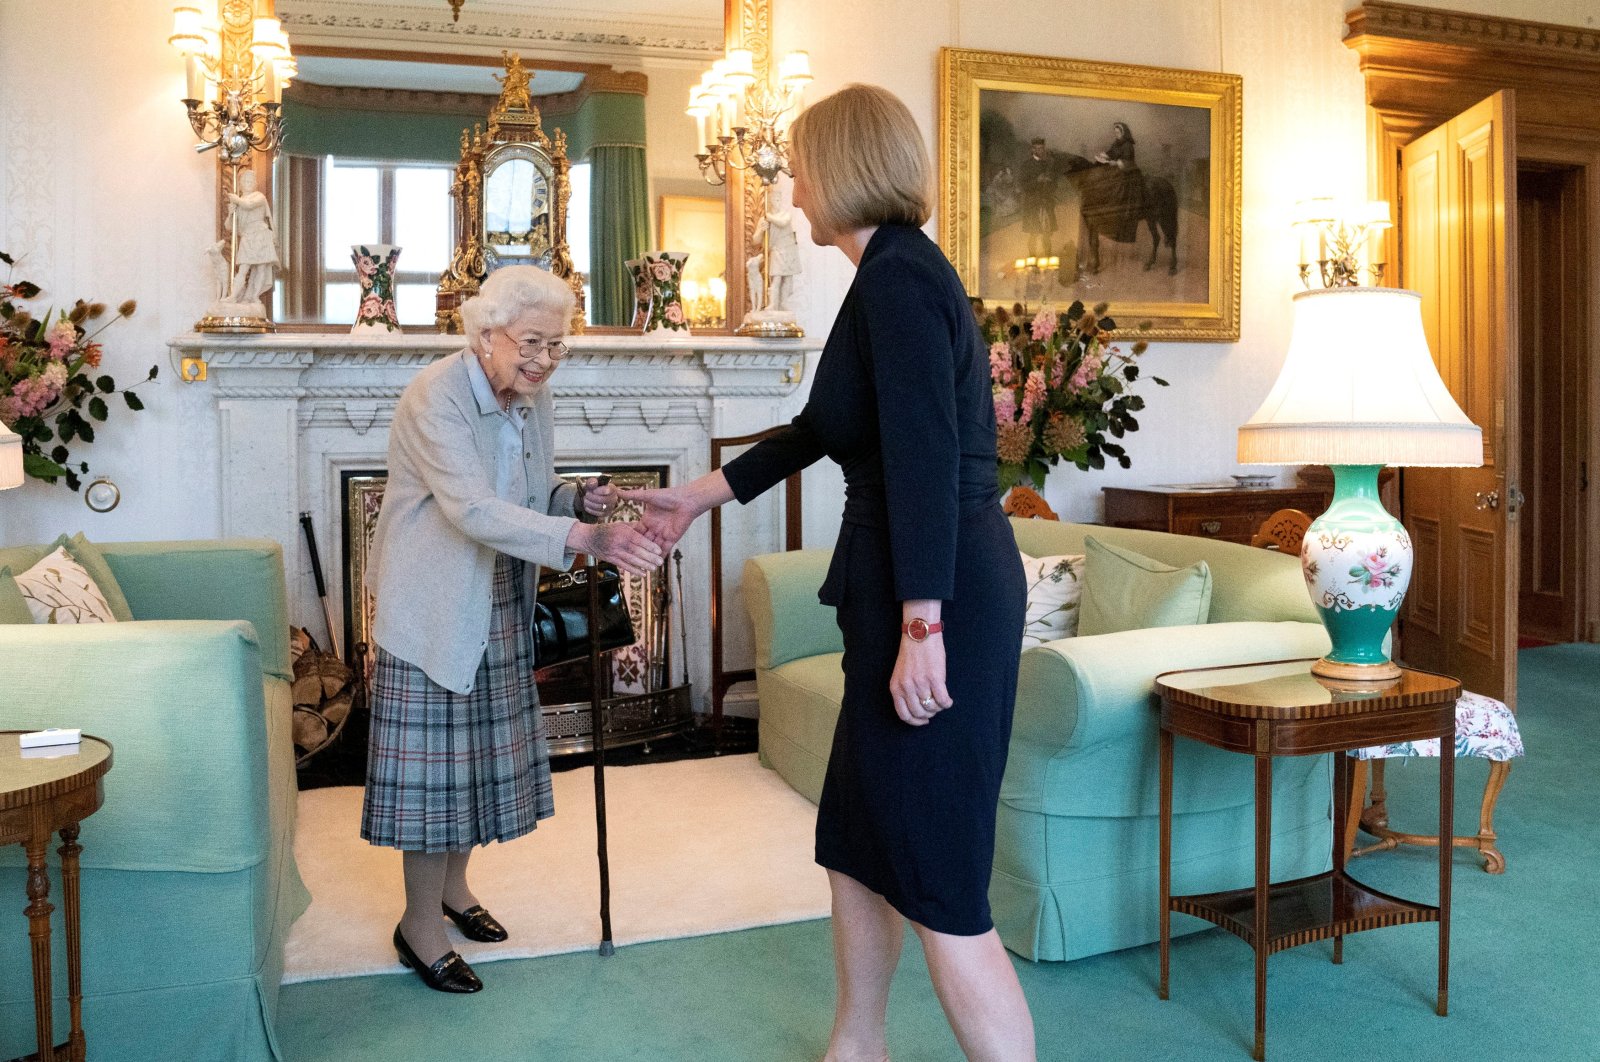 Queen Elizabeth (L) welcomes Liz Truss during an audience where she invited the newly elected leader of the Conservative party to become prime minister and form a new government, at Balmoral Castle, Scotland, U.K, Sept. 6, 2022. (Reuters Photo)